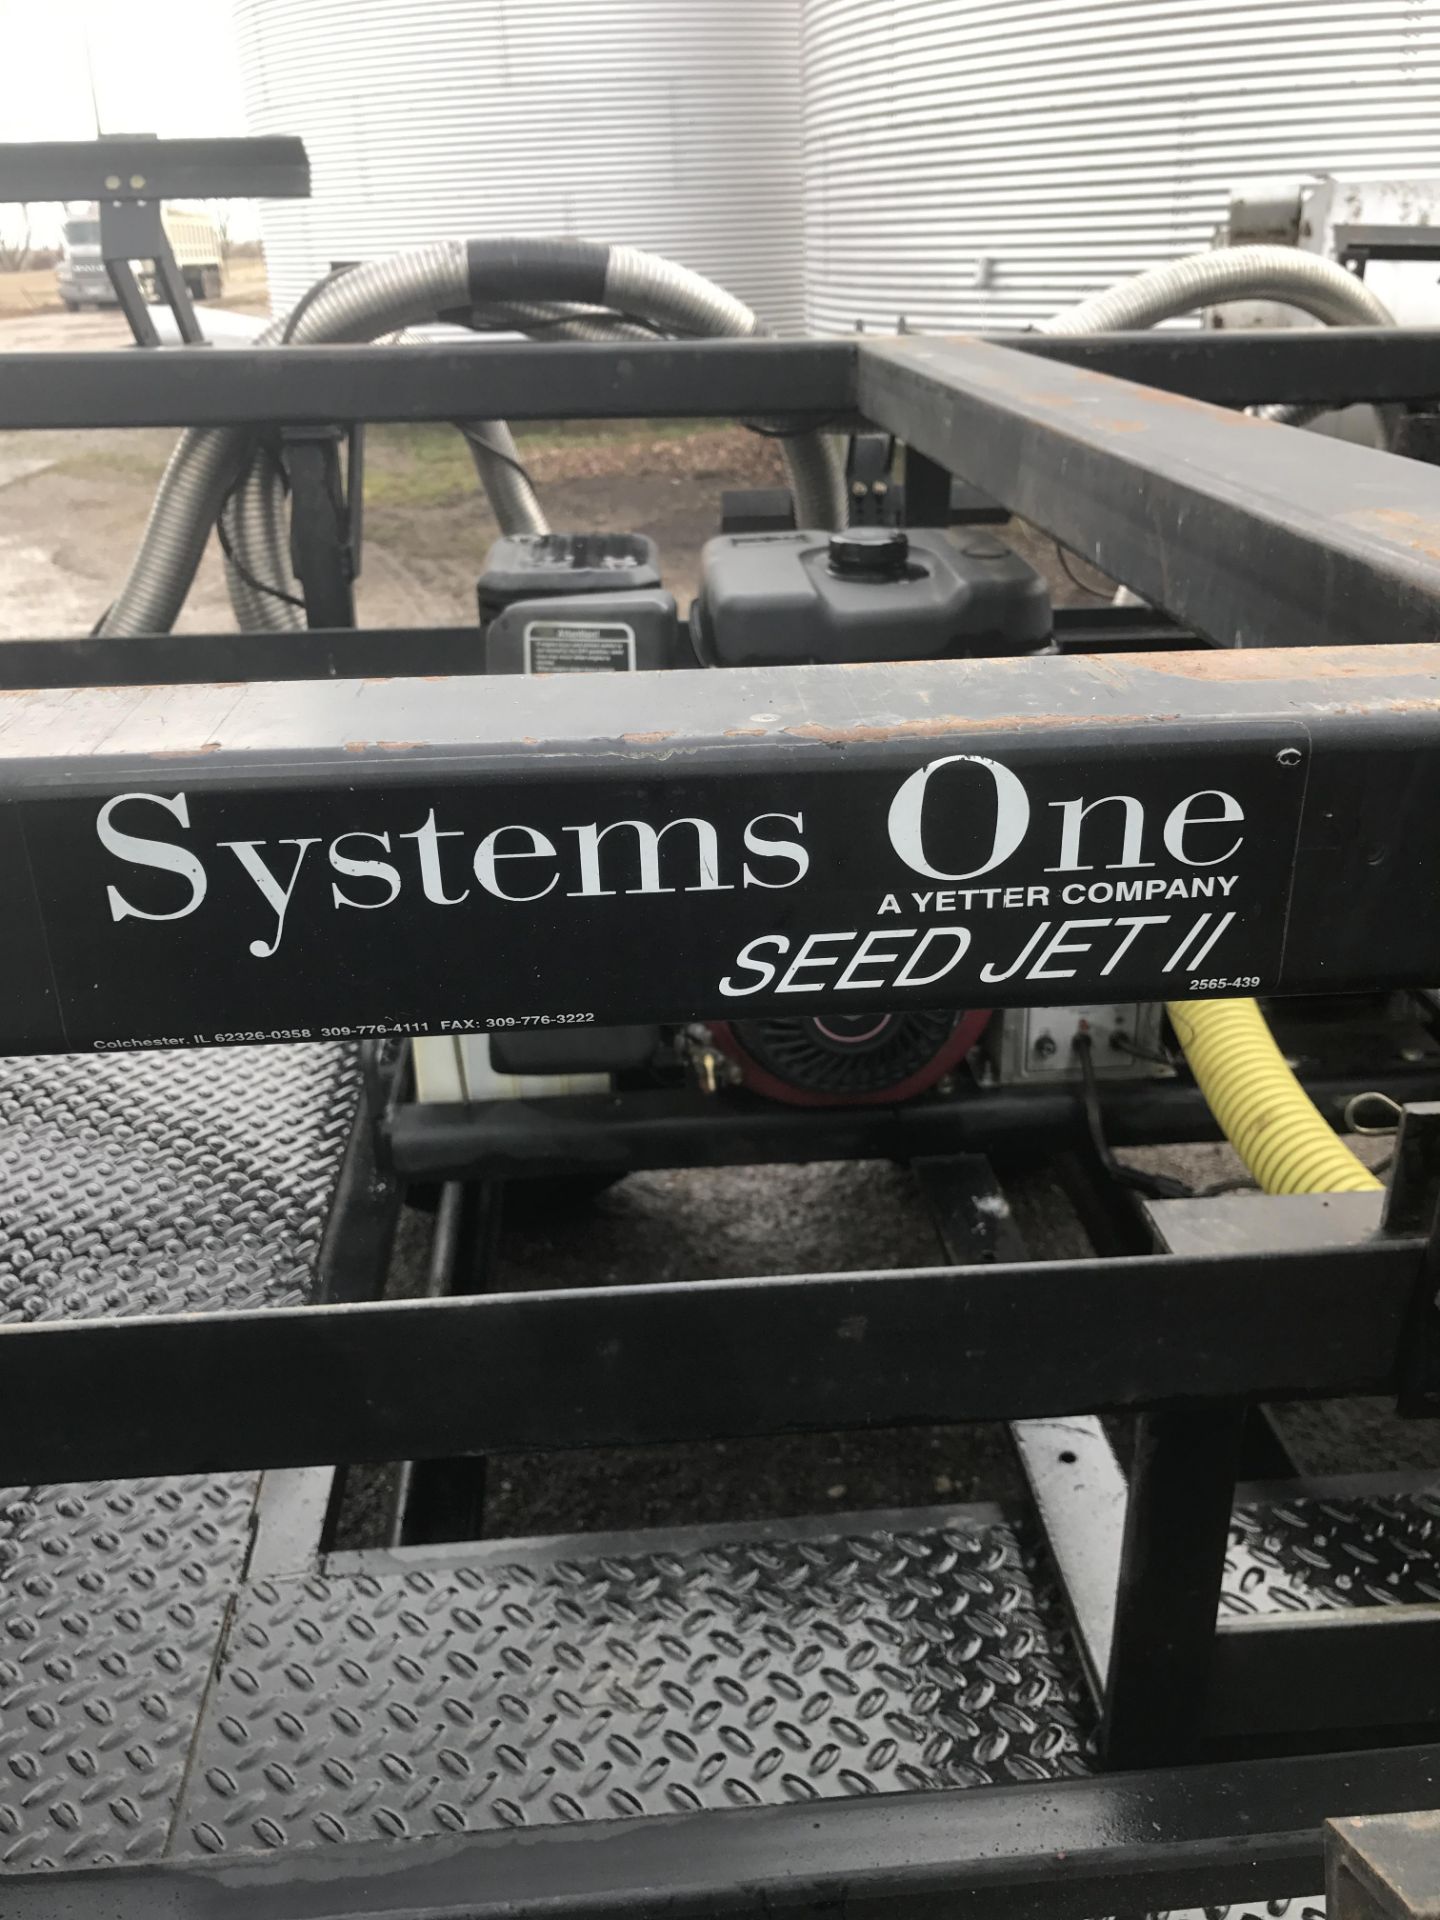 Yetter System One seed tender, Seed Jet II, holds 2 proboxes, 11 hp electric start Briggs & - Bild 5 aus 7